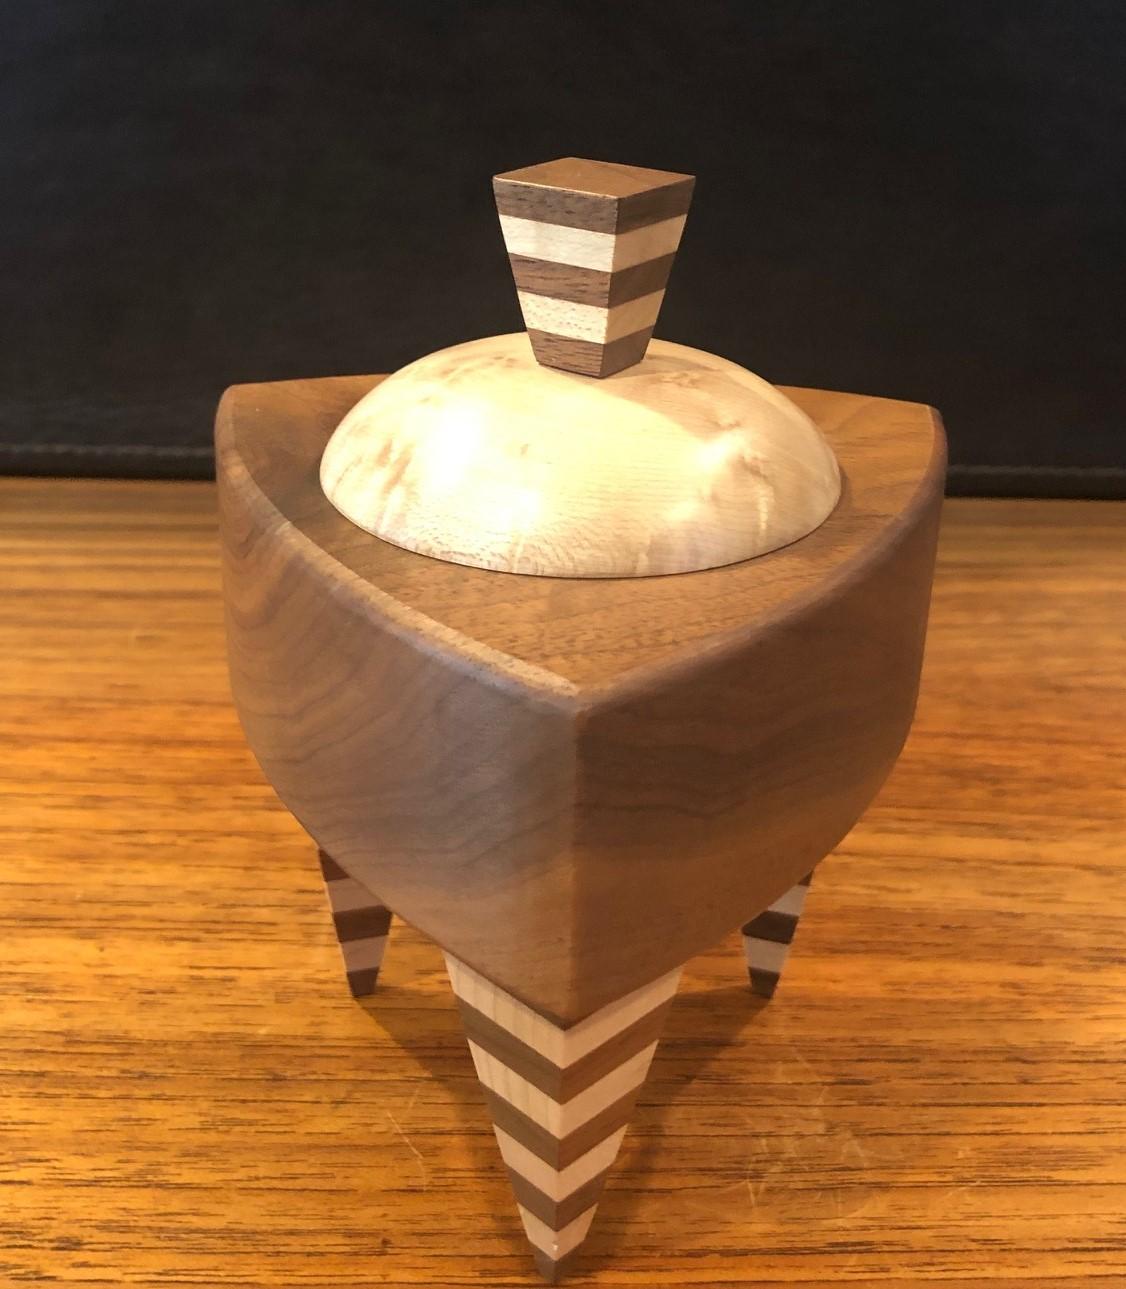 Memphis style mixed wood triangular trinket box by Russ Keil, circa 1990s. The box measures 4.5